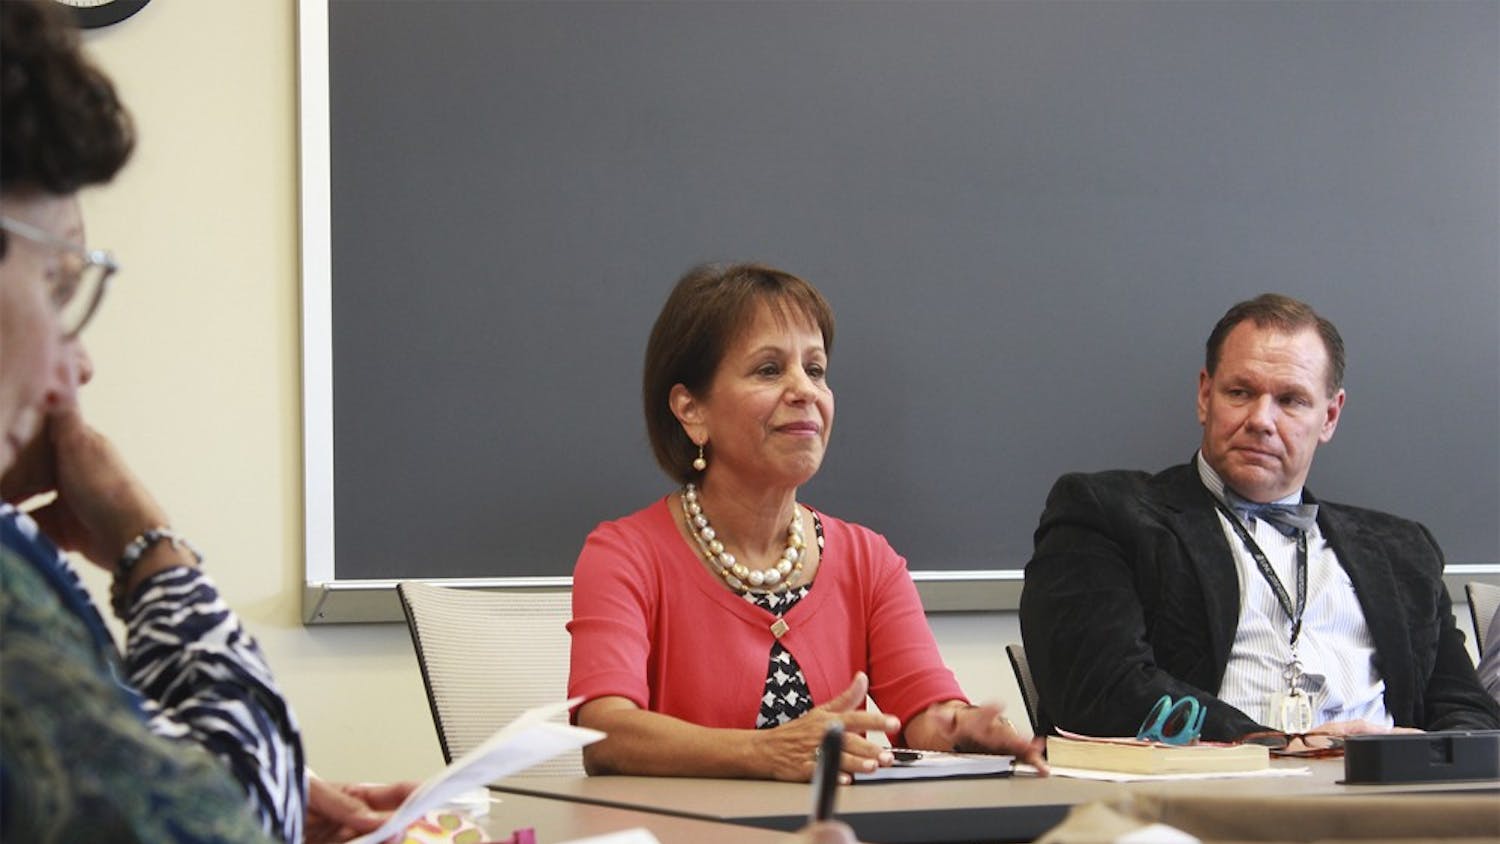 Chancellor Carol Folt spoke with faculty Monday afternoon in the Steele Building. Among the topics discussed were Title 9, Board of Governors, and the recent passing of Professor Feng Liu.